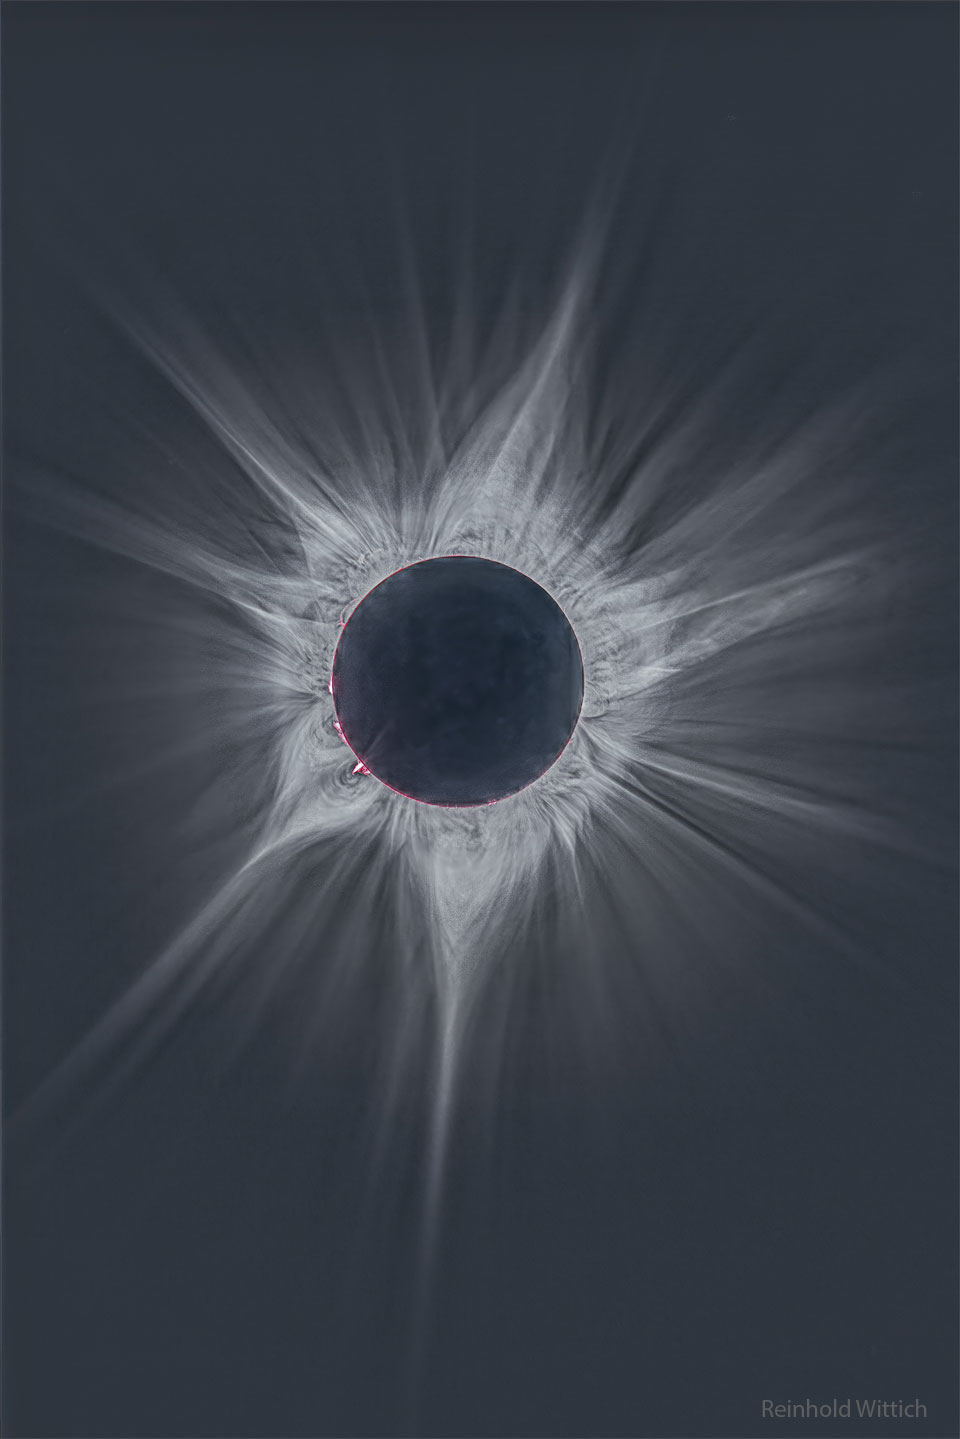 A deep image of the Sun's surrounding corona during the 
April 2023 total solar eclipse. The central disk is dark and
many bright and complex rays are seen extending out. A few hot pink
filaments can be seen just around the Sun's edge.
Please see the explanation for more detailed information.